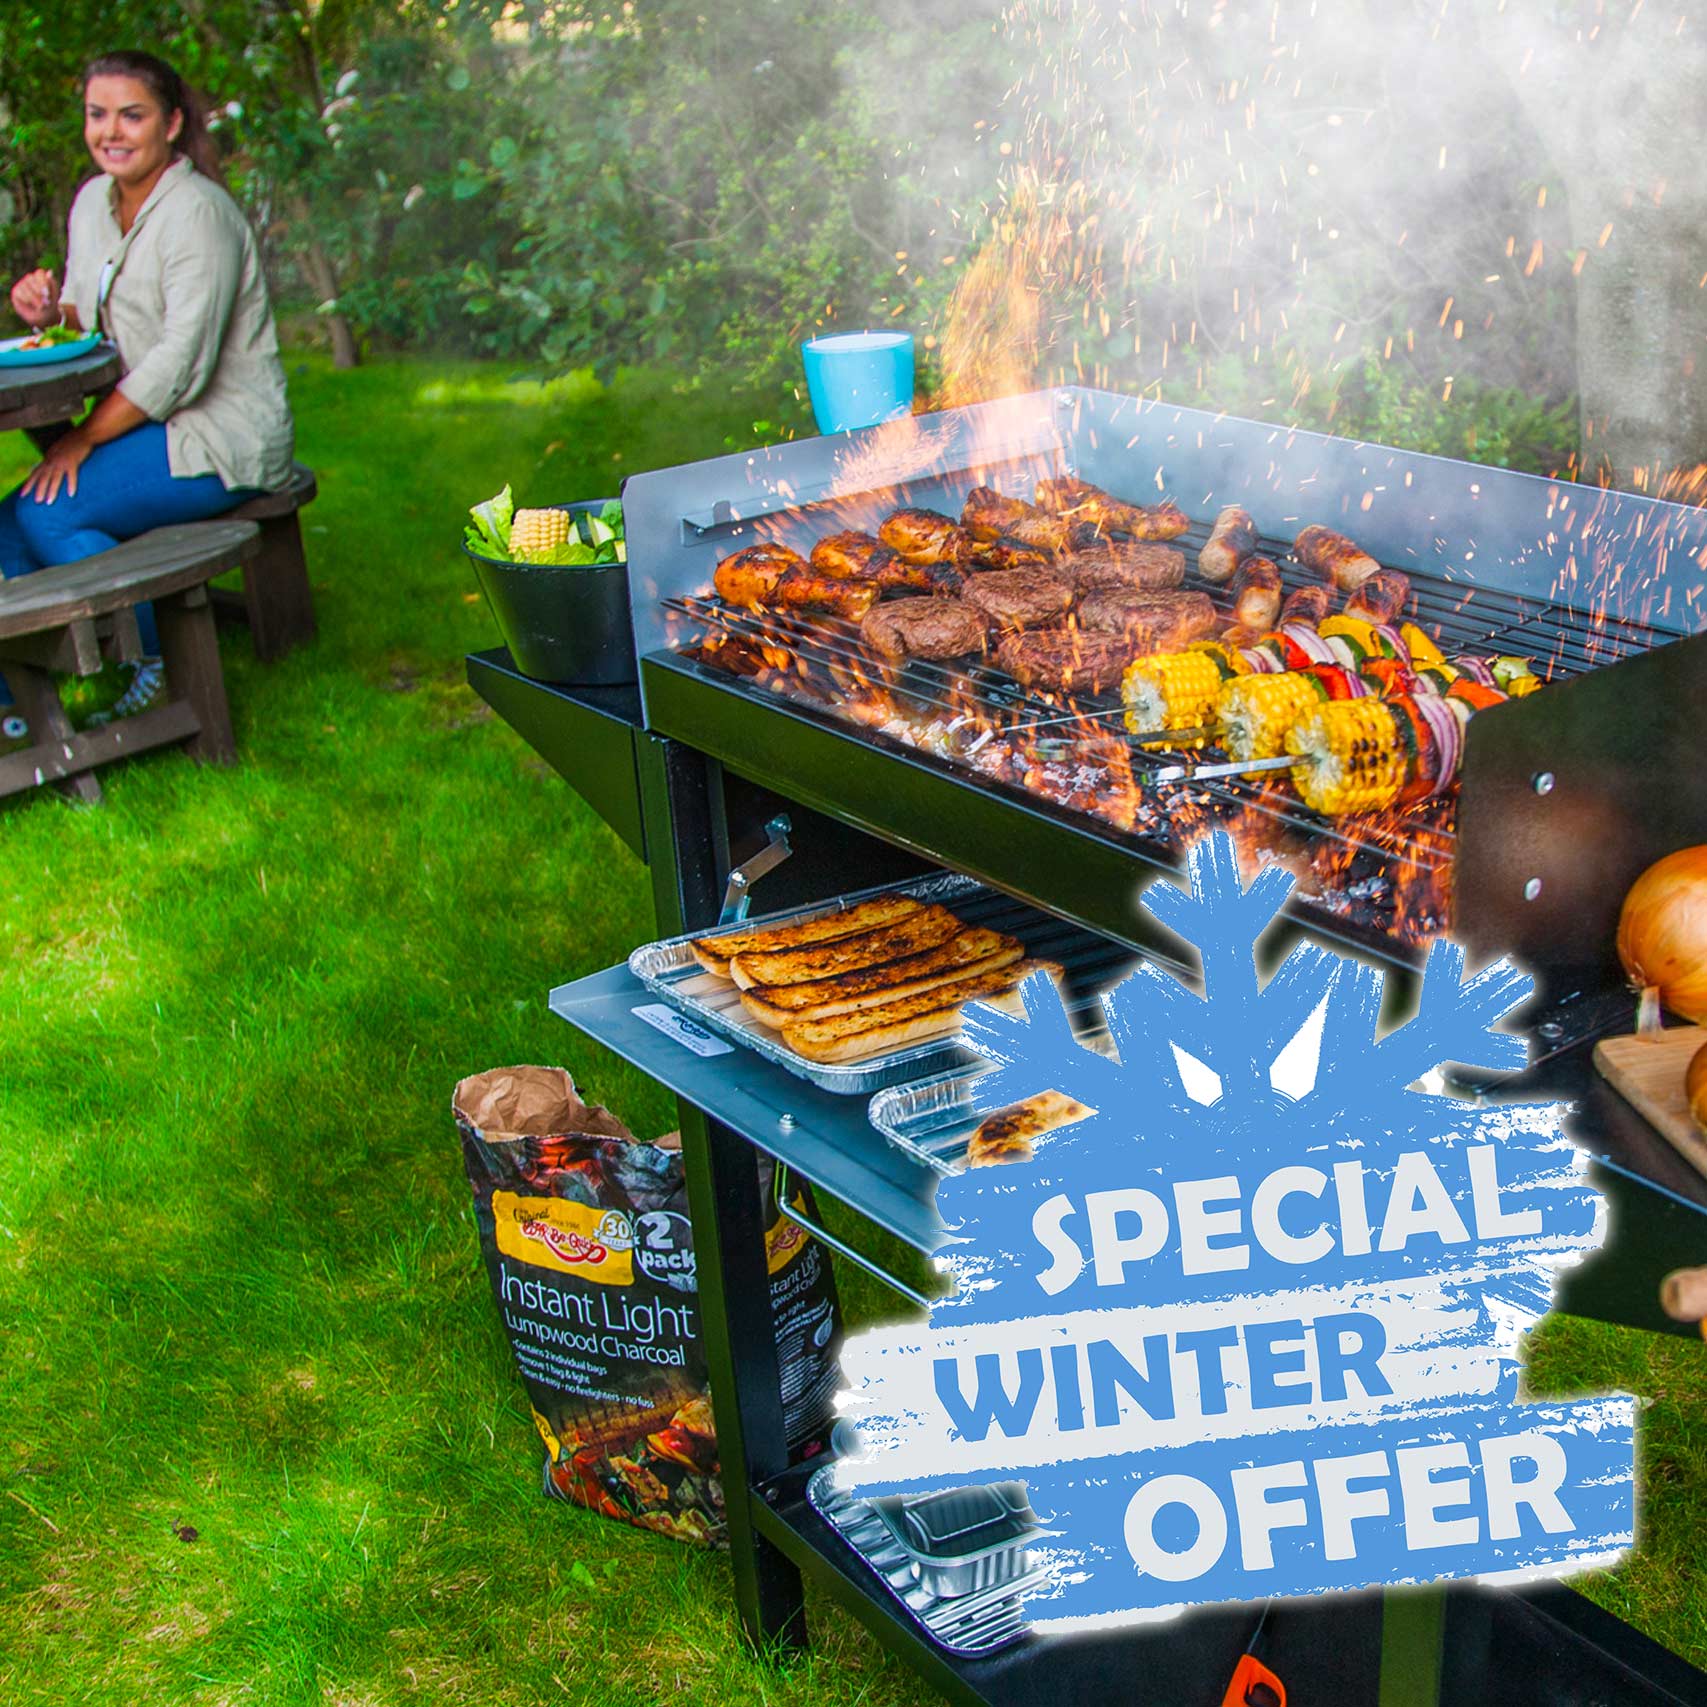 https://www.barbequick.com/grillguide/wp-content/uploads/2019/04/Trolley-GB-Winter-Offers-Metal-BBQ-Images.jpg